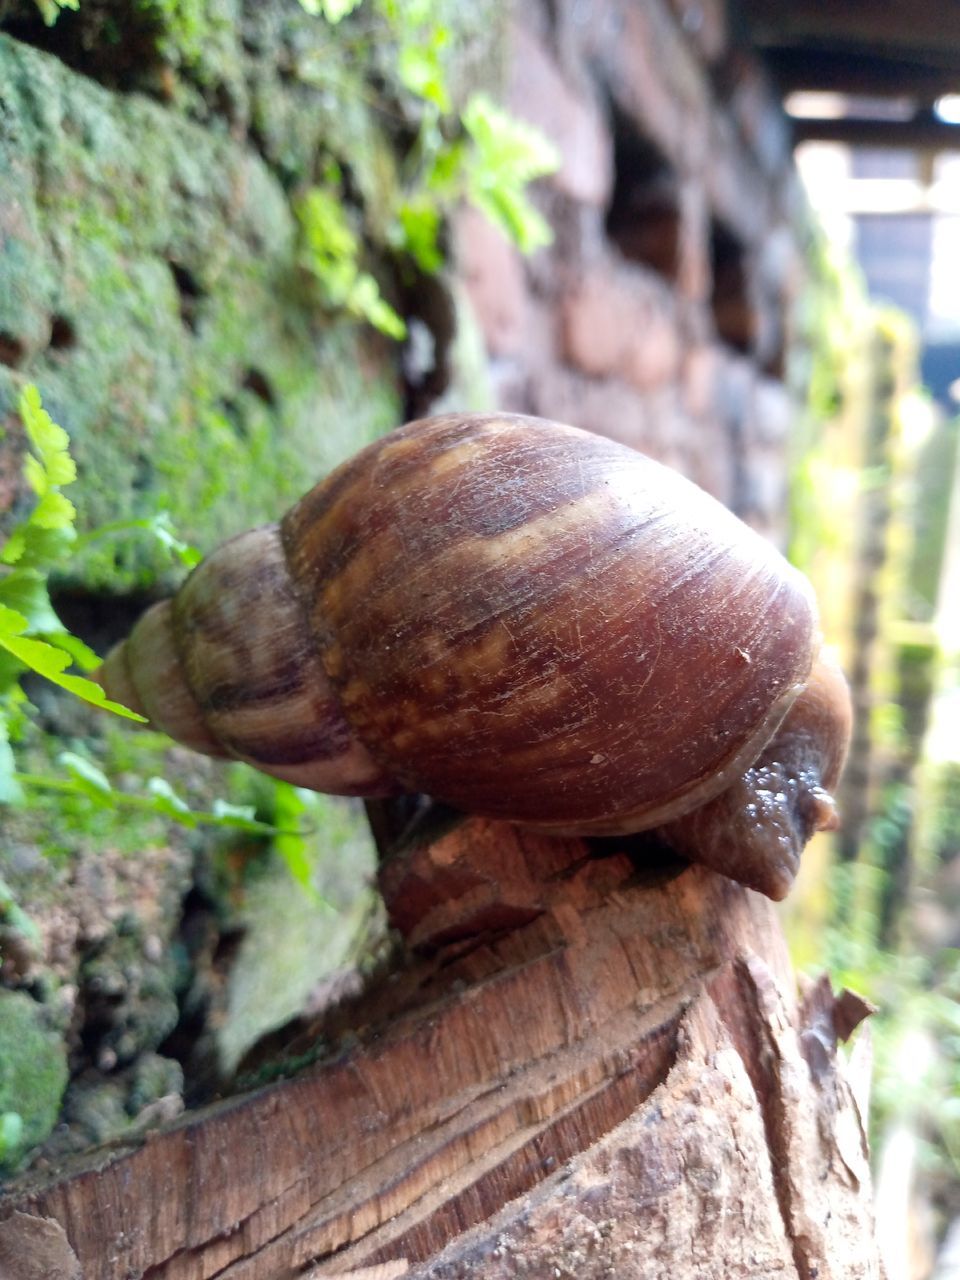 snail, snails and slugs, gastropod, mollusk, animal wildlife, animal themes, animal, close-up, shell, nature, wildlife, no people, animal shell, focus on foreground, tree, one animal, day, plant, wood, outdoors, tree trunk, boredom, brown, trunk